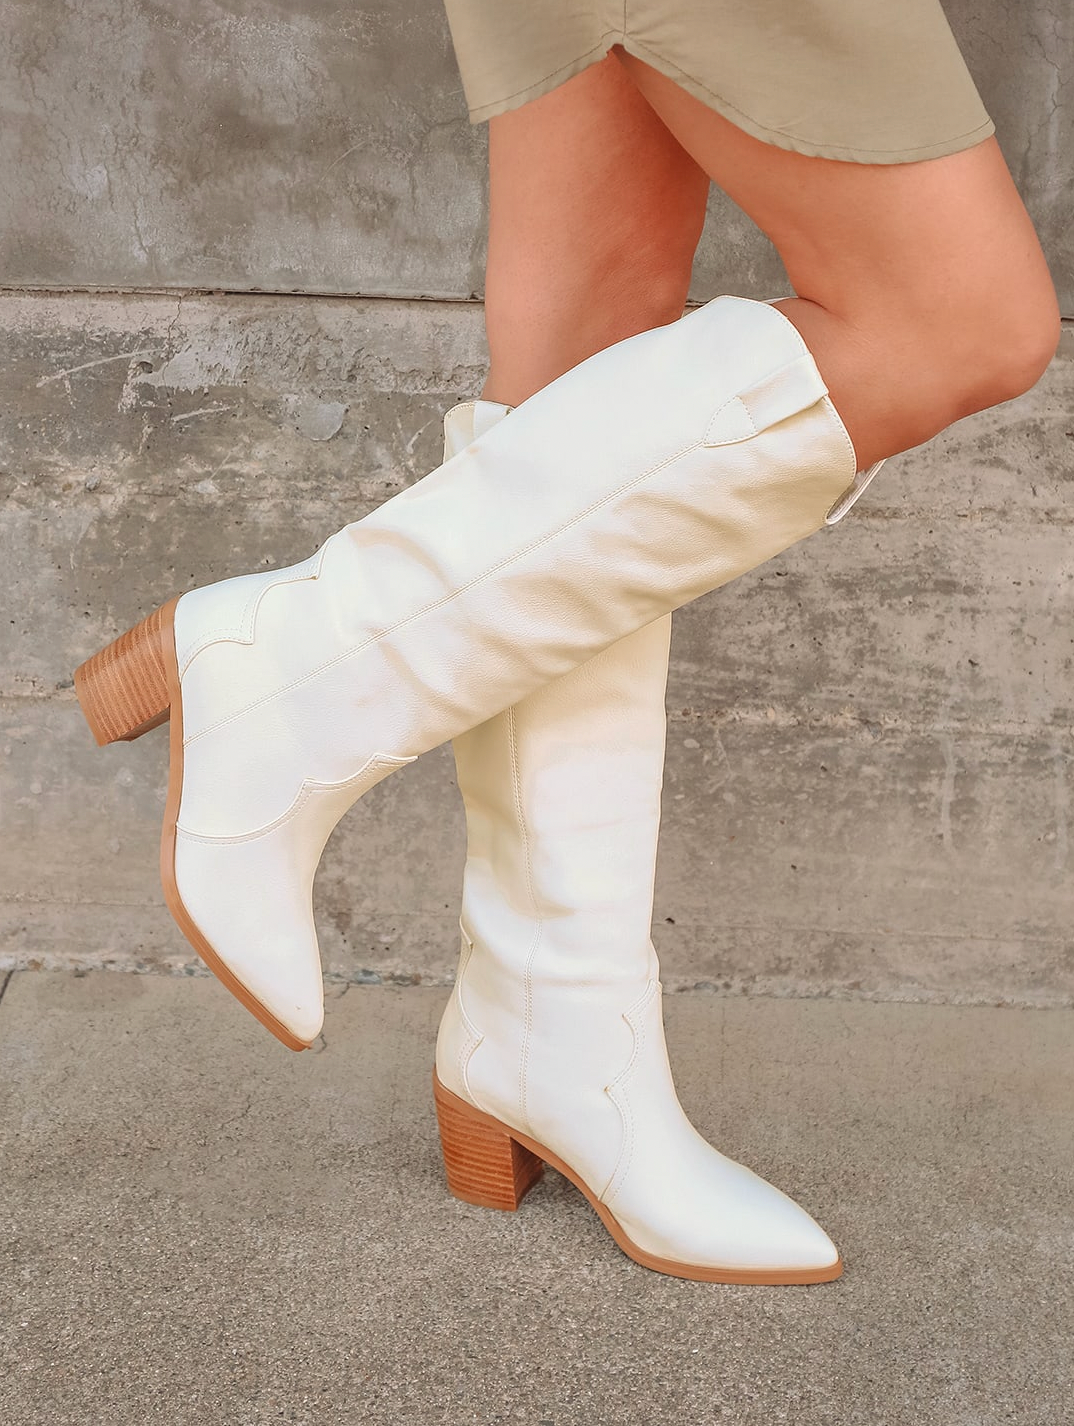 Billini Novena Tall Boots Off White with Wooden Heel